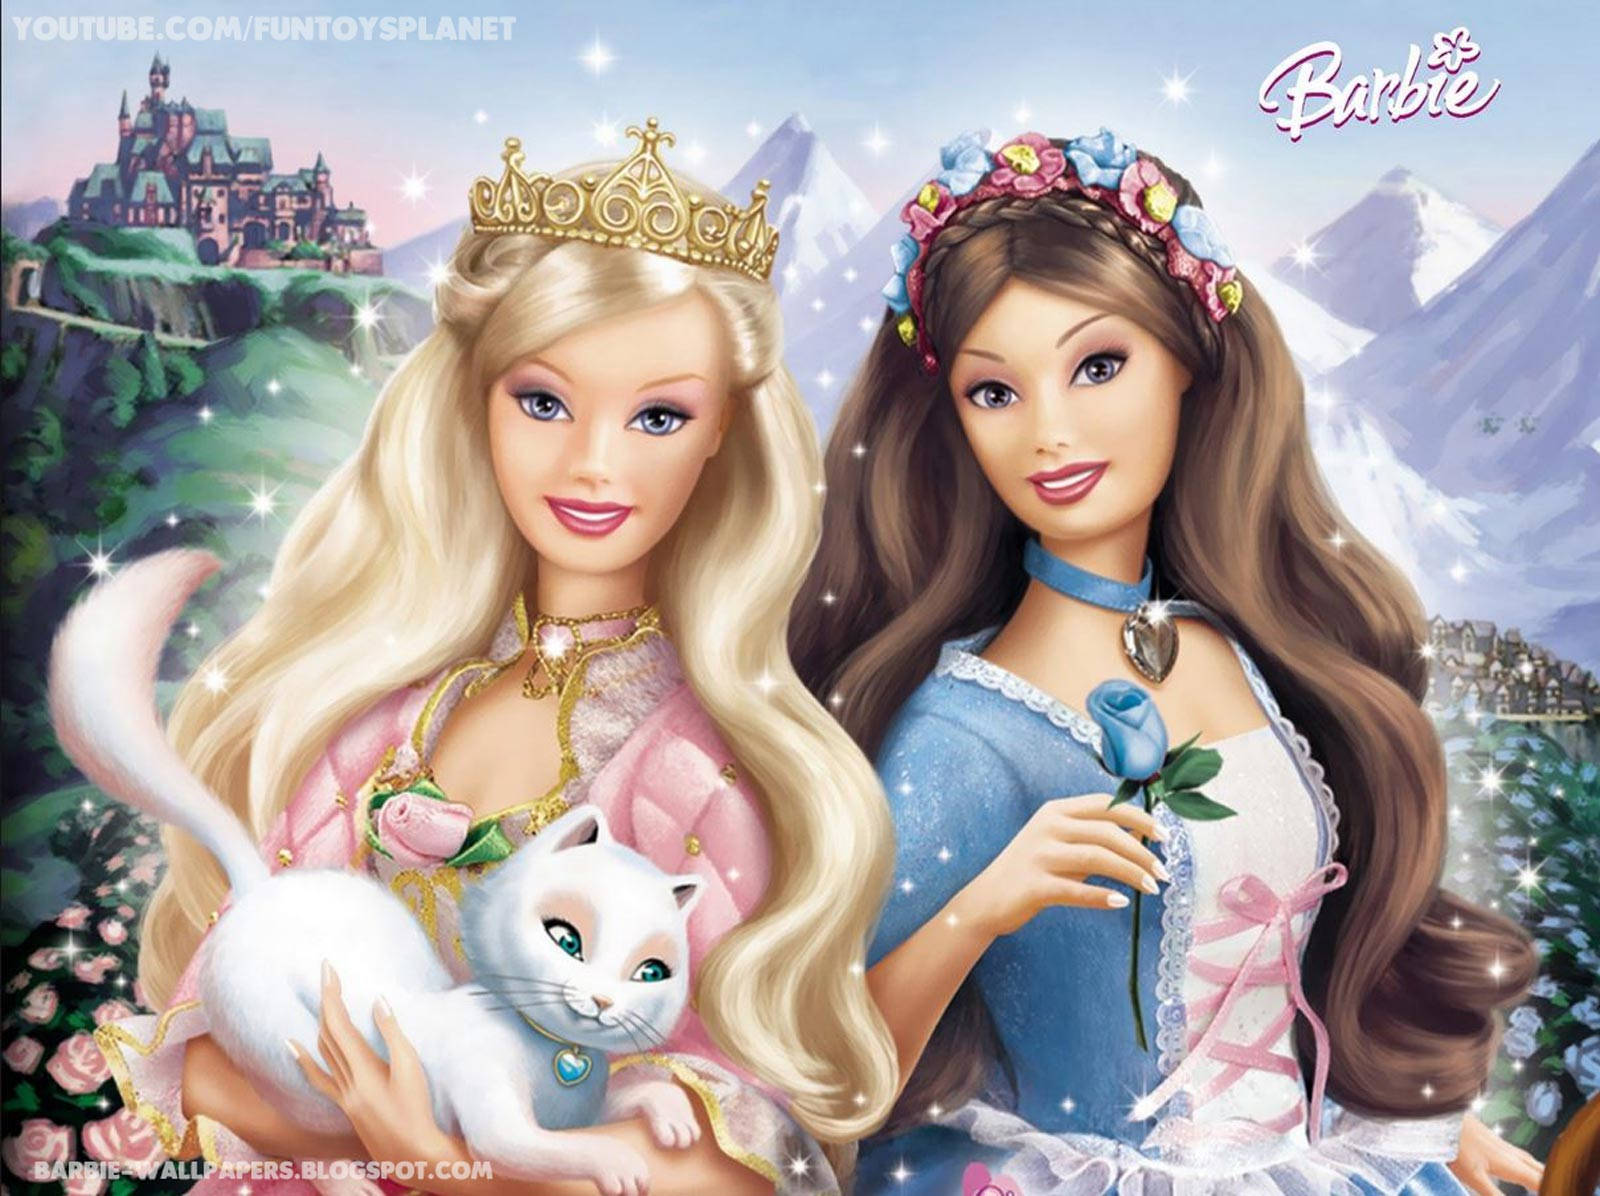 Download Barbie Princess And The Pauper Wallpaper 